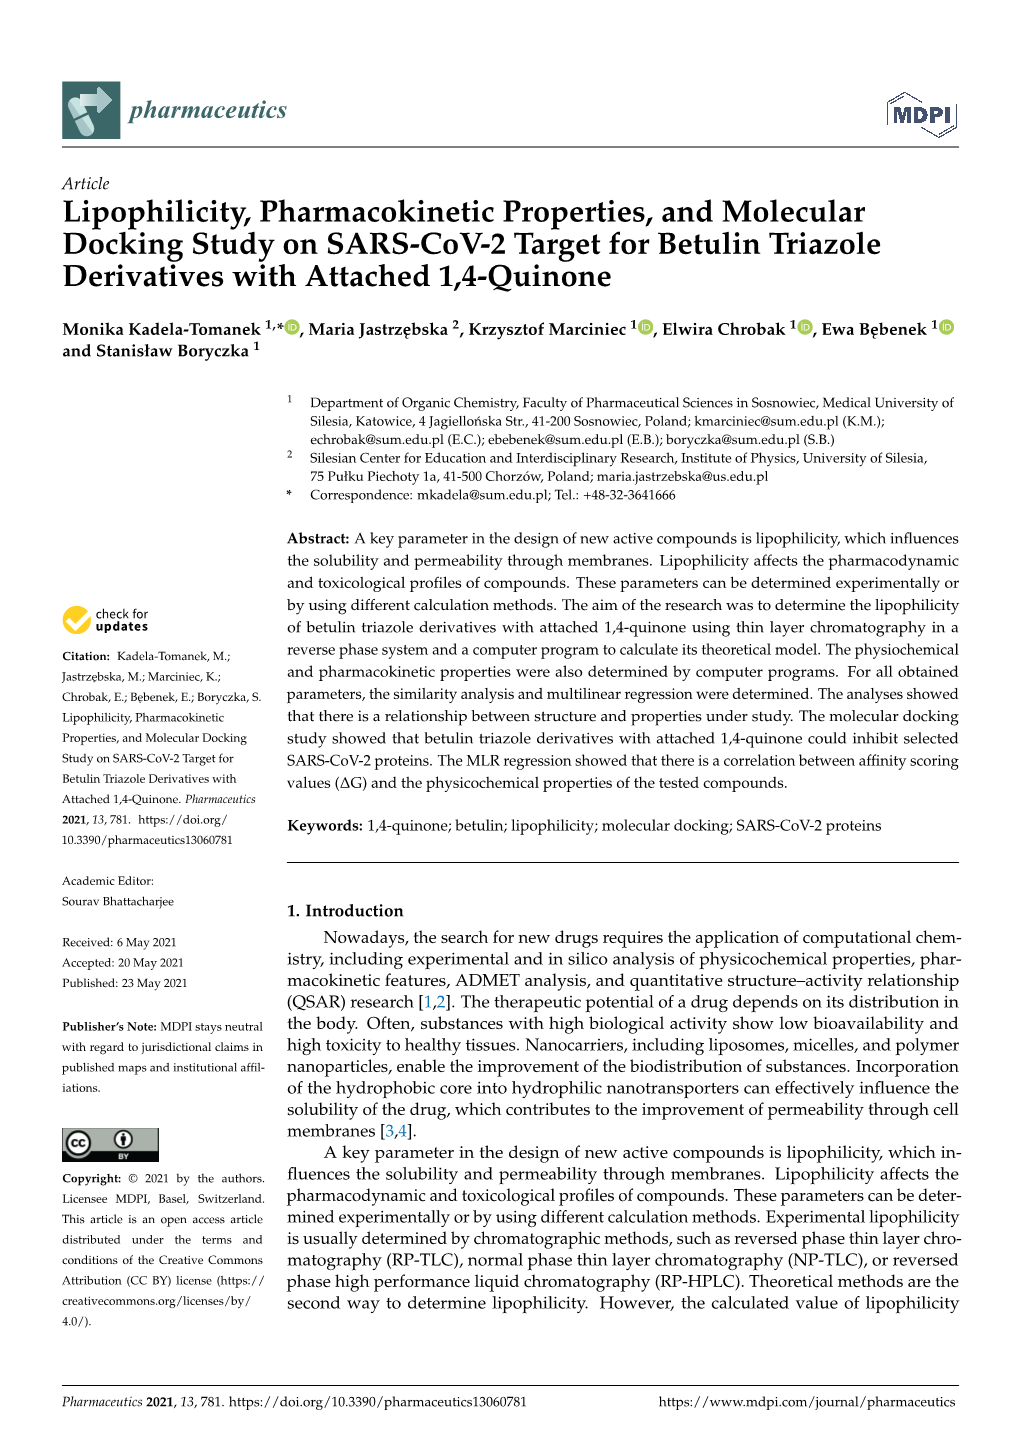 Lipophilicity, Pharmacokinetic Properties, and Molecular Docking Study on SARS-Cov-2 Target for Betulin Triazole Derivatives with Attached 1,4-Quinone